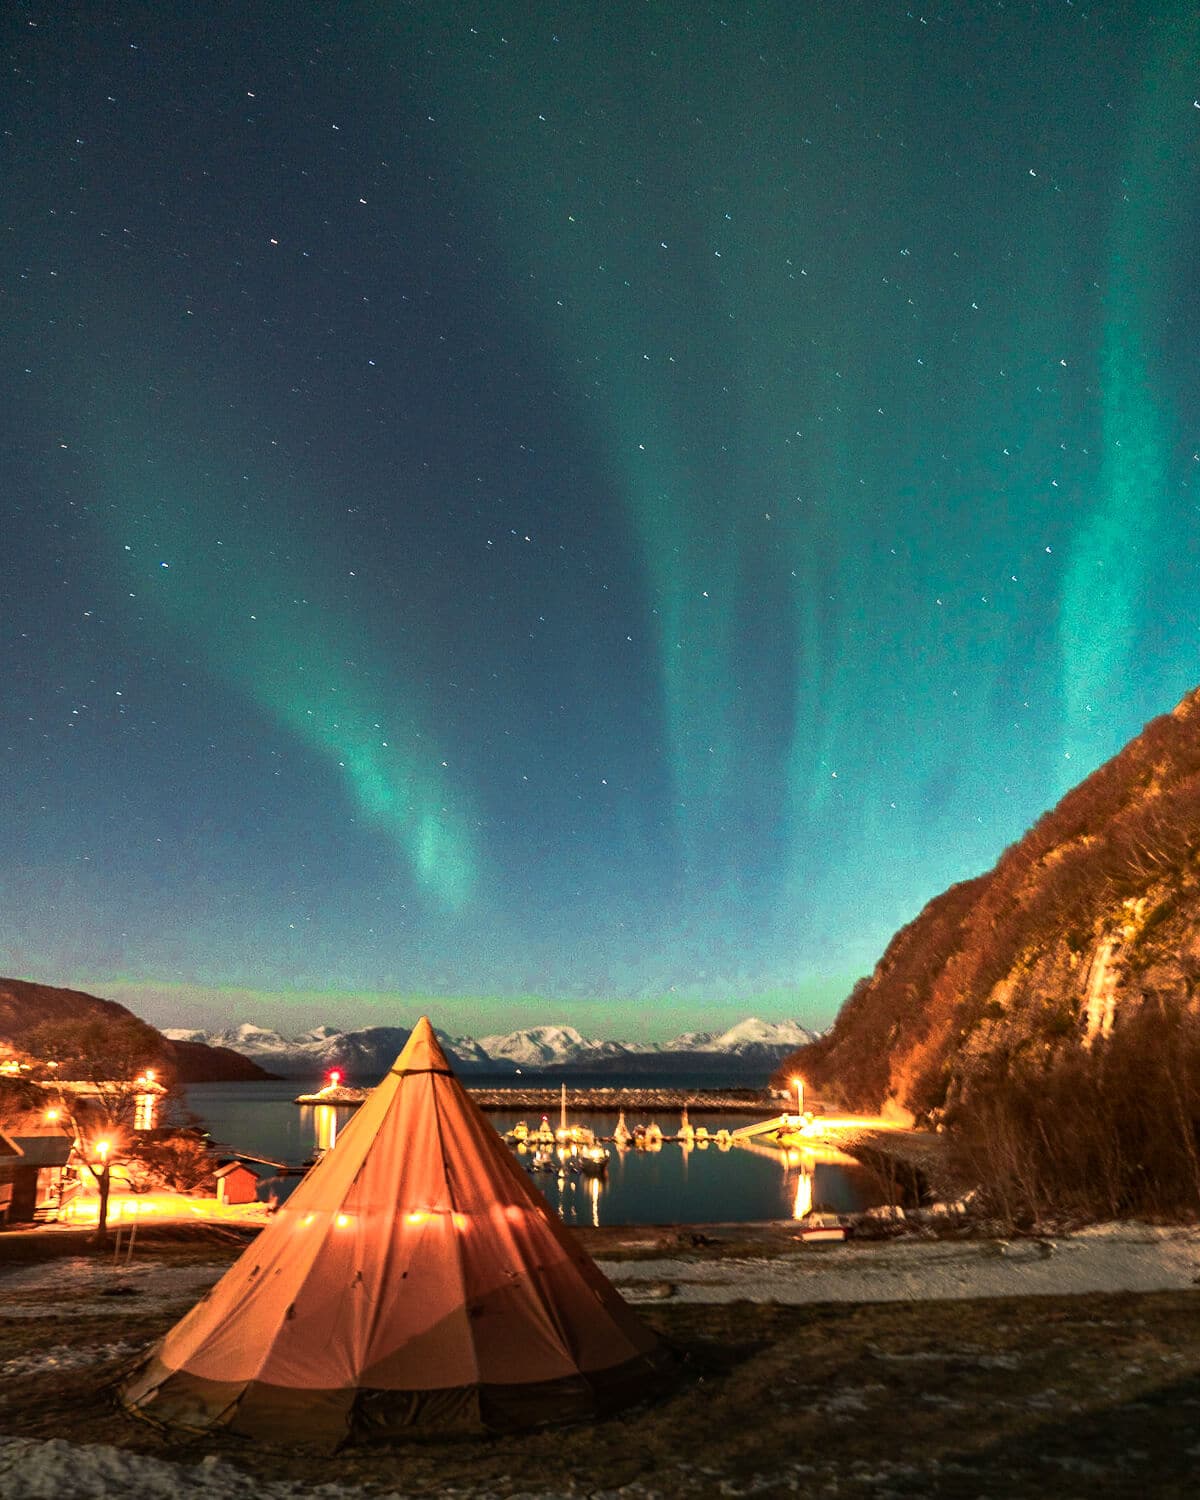 The Best Time to See the Northern Lights in Norway + Helpful Tips - Live It's the Weekend